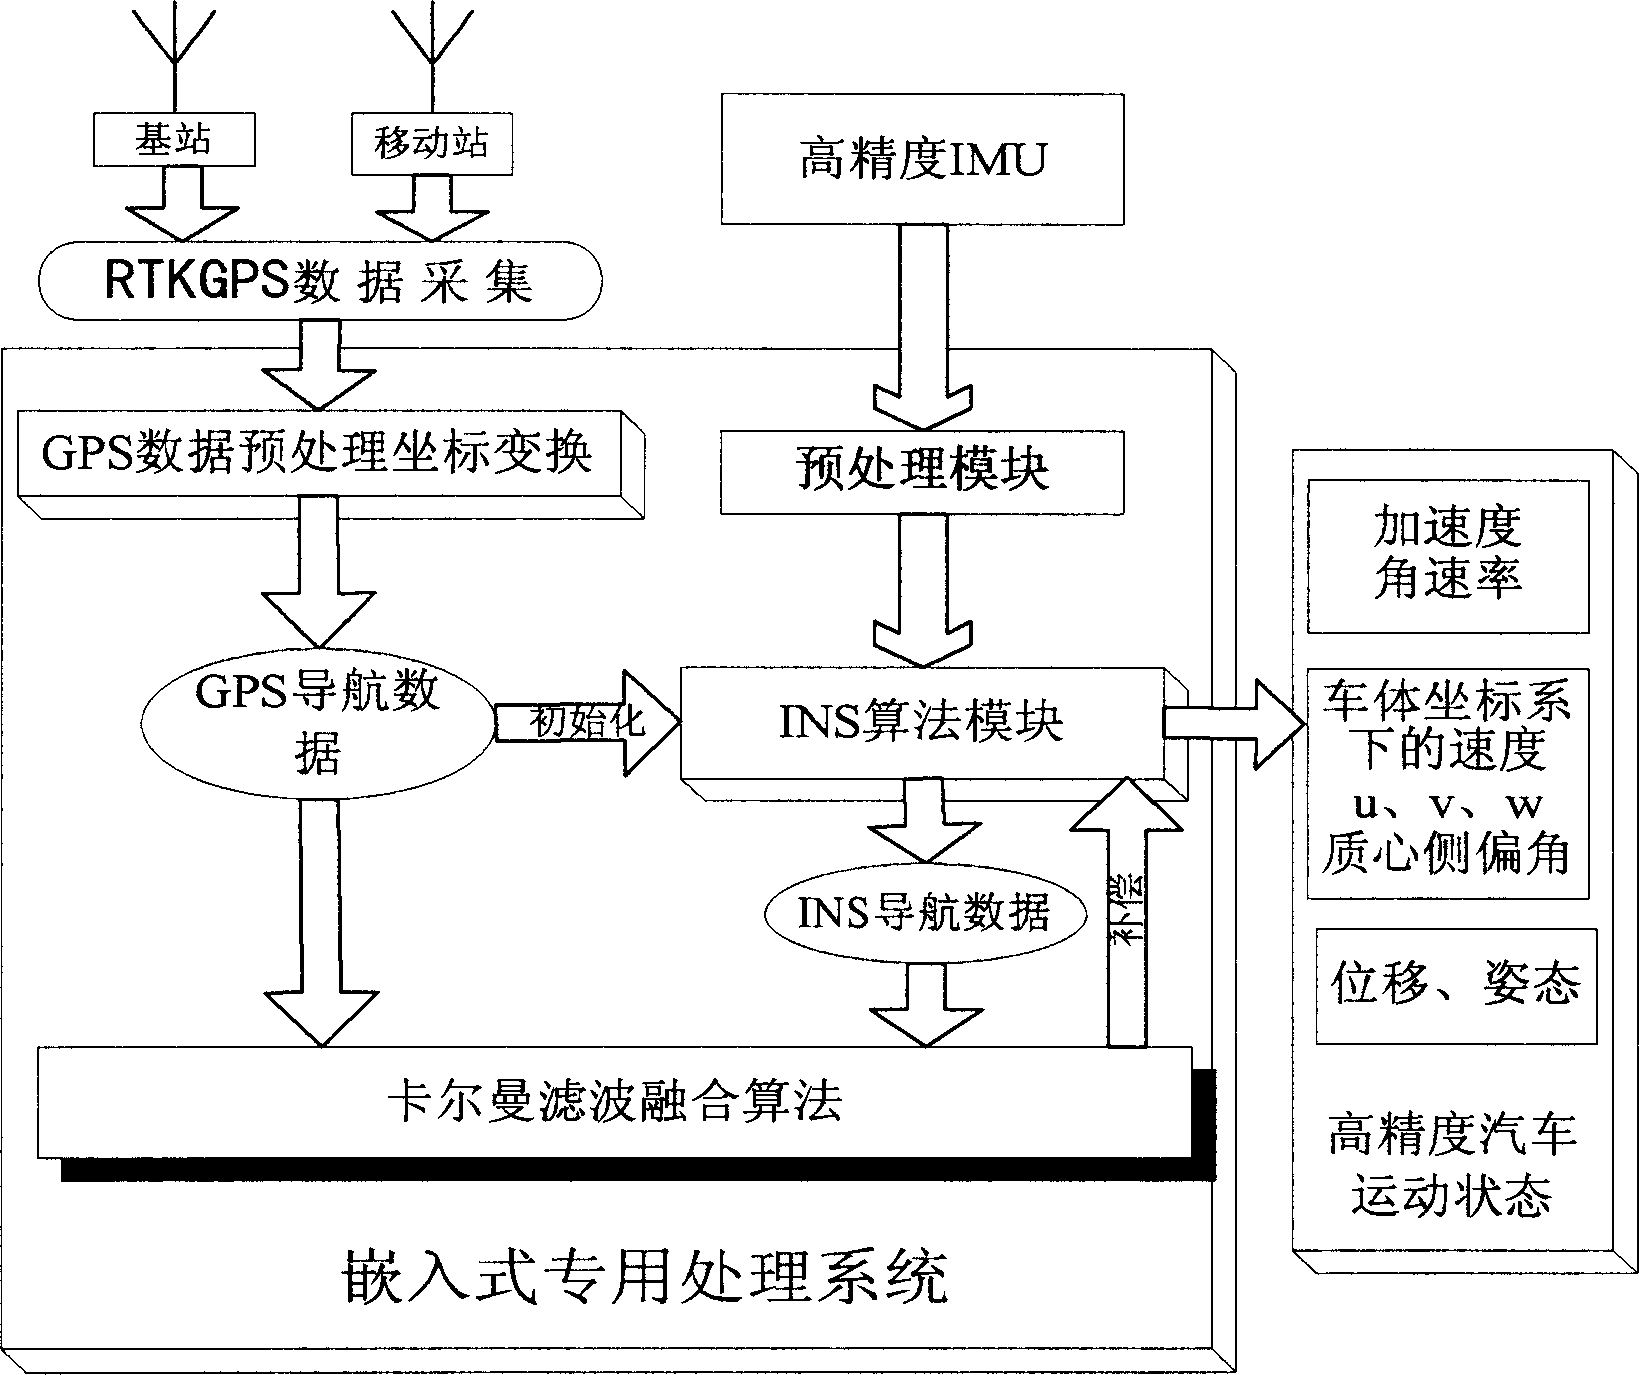 Testing system for integral vehicle running station